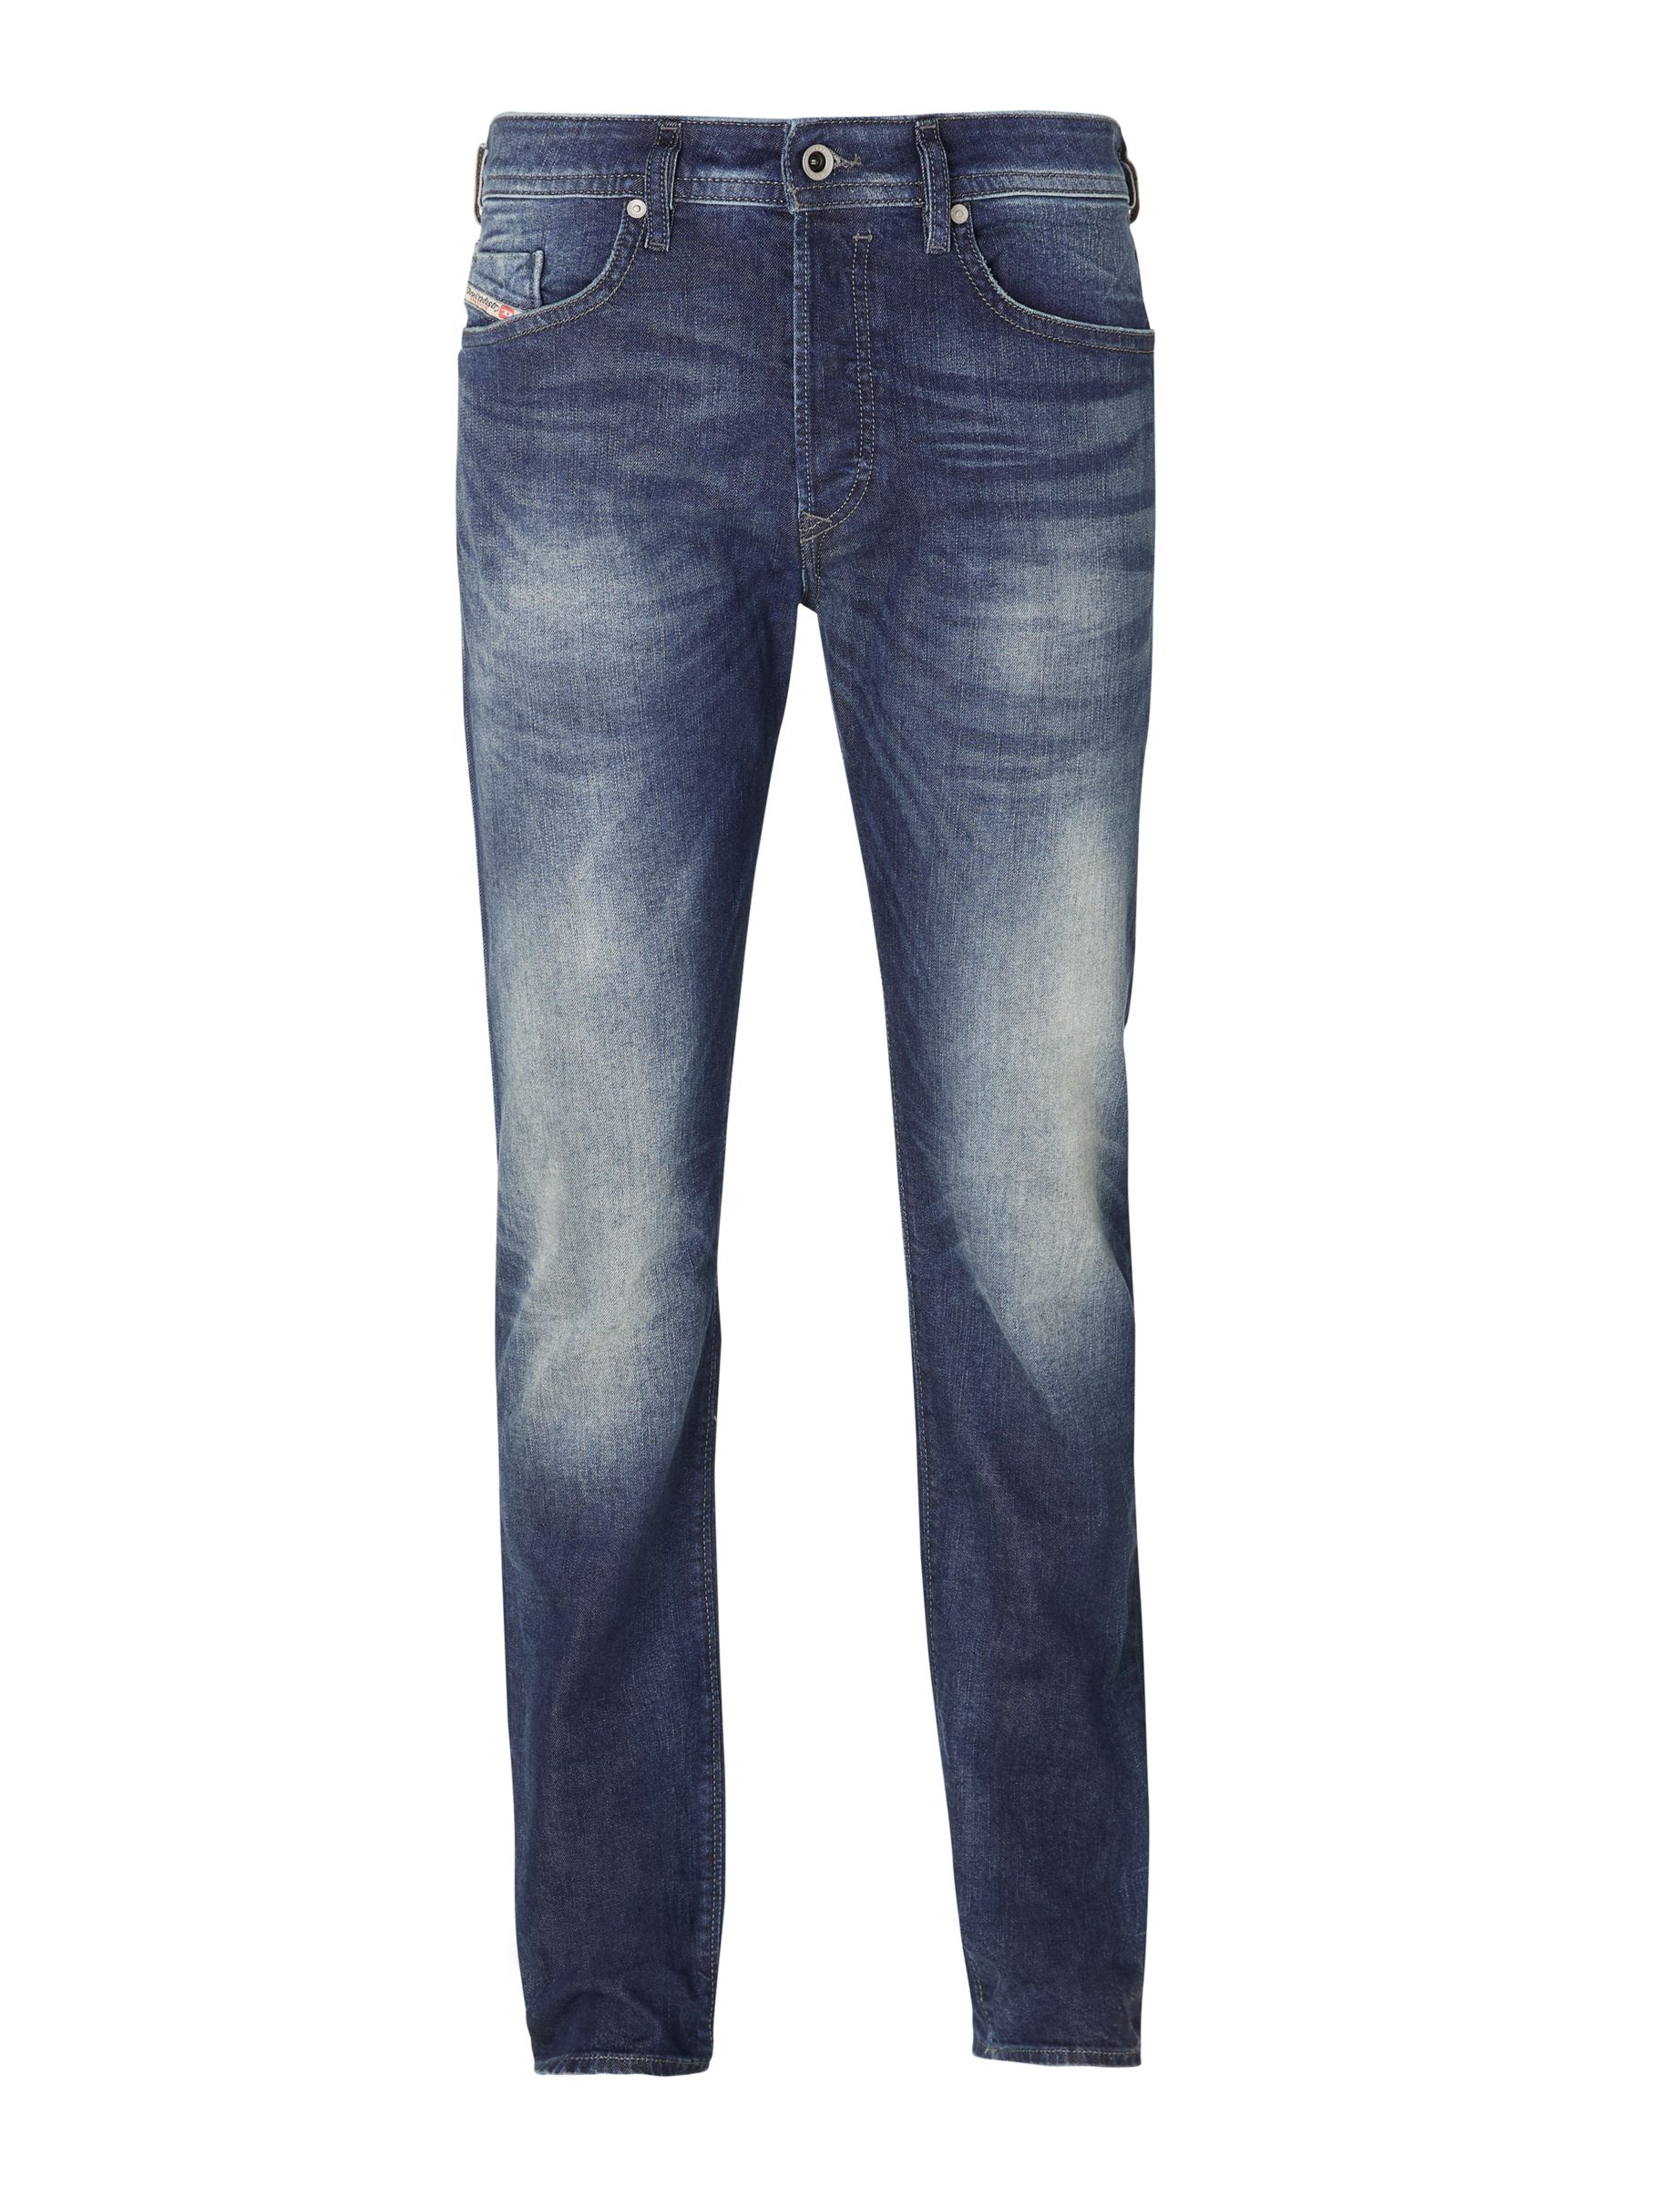 Diesel Buster 0853R Tapered Jeans, Mid Wash at John Lewis & Partners